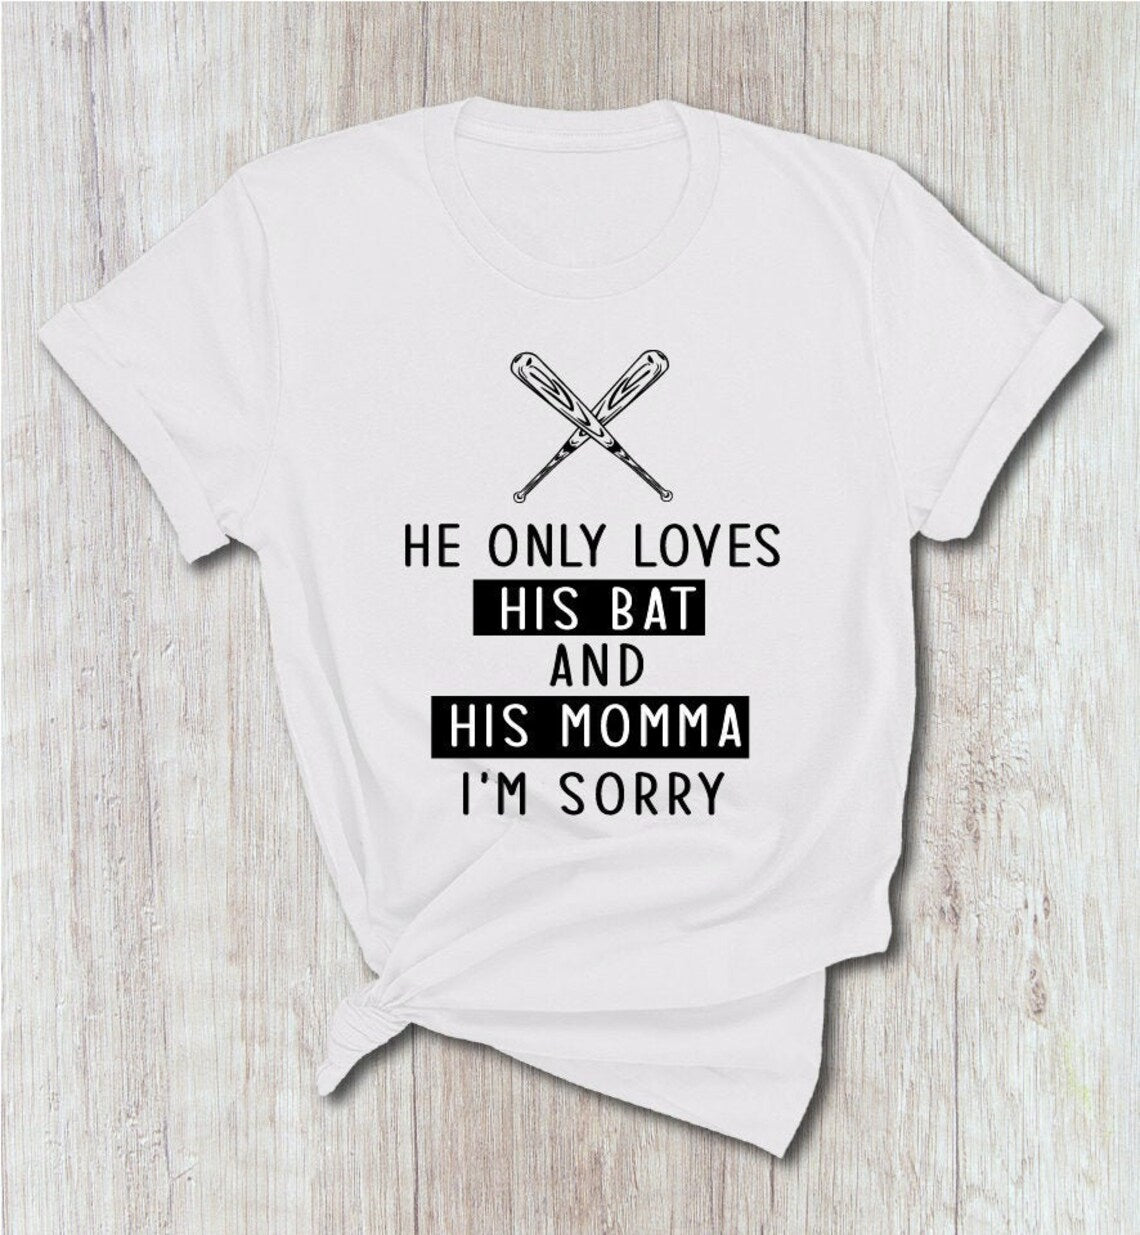 He only loves his Bat and HIs Momma I'm Sorry